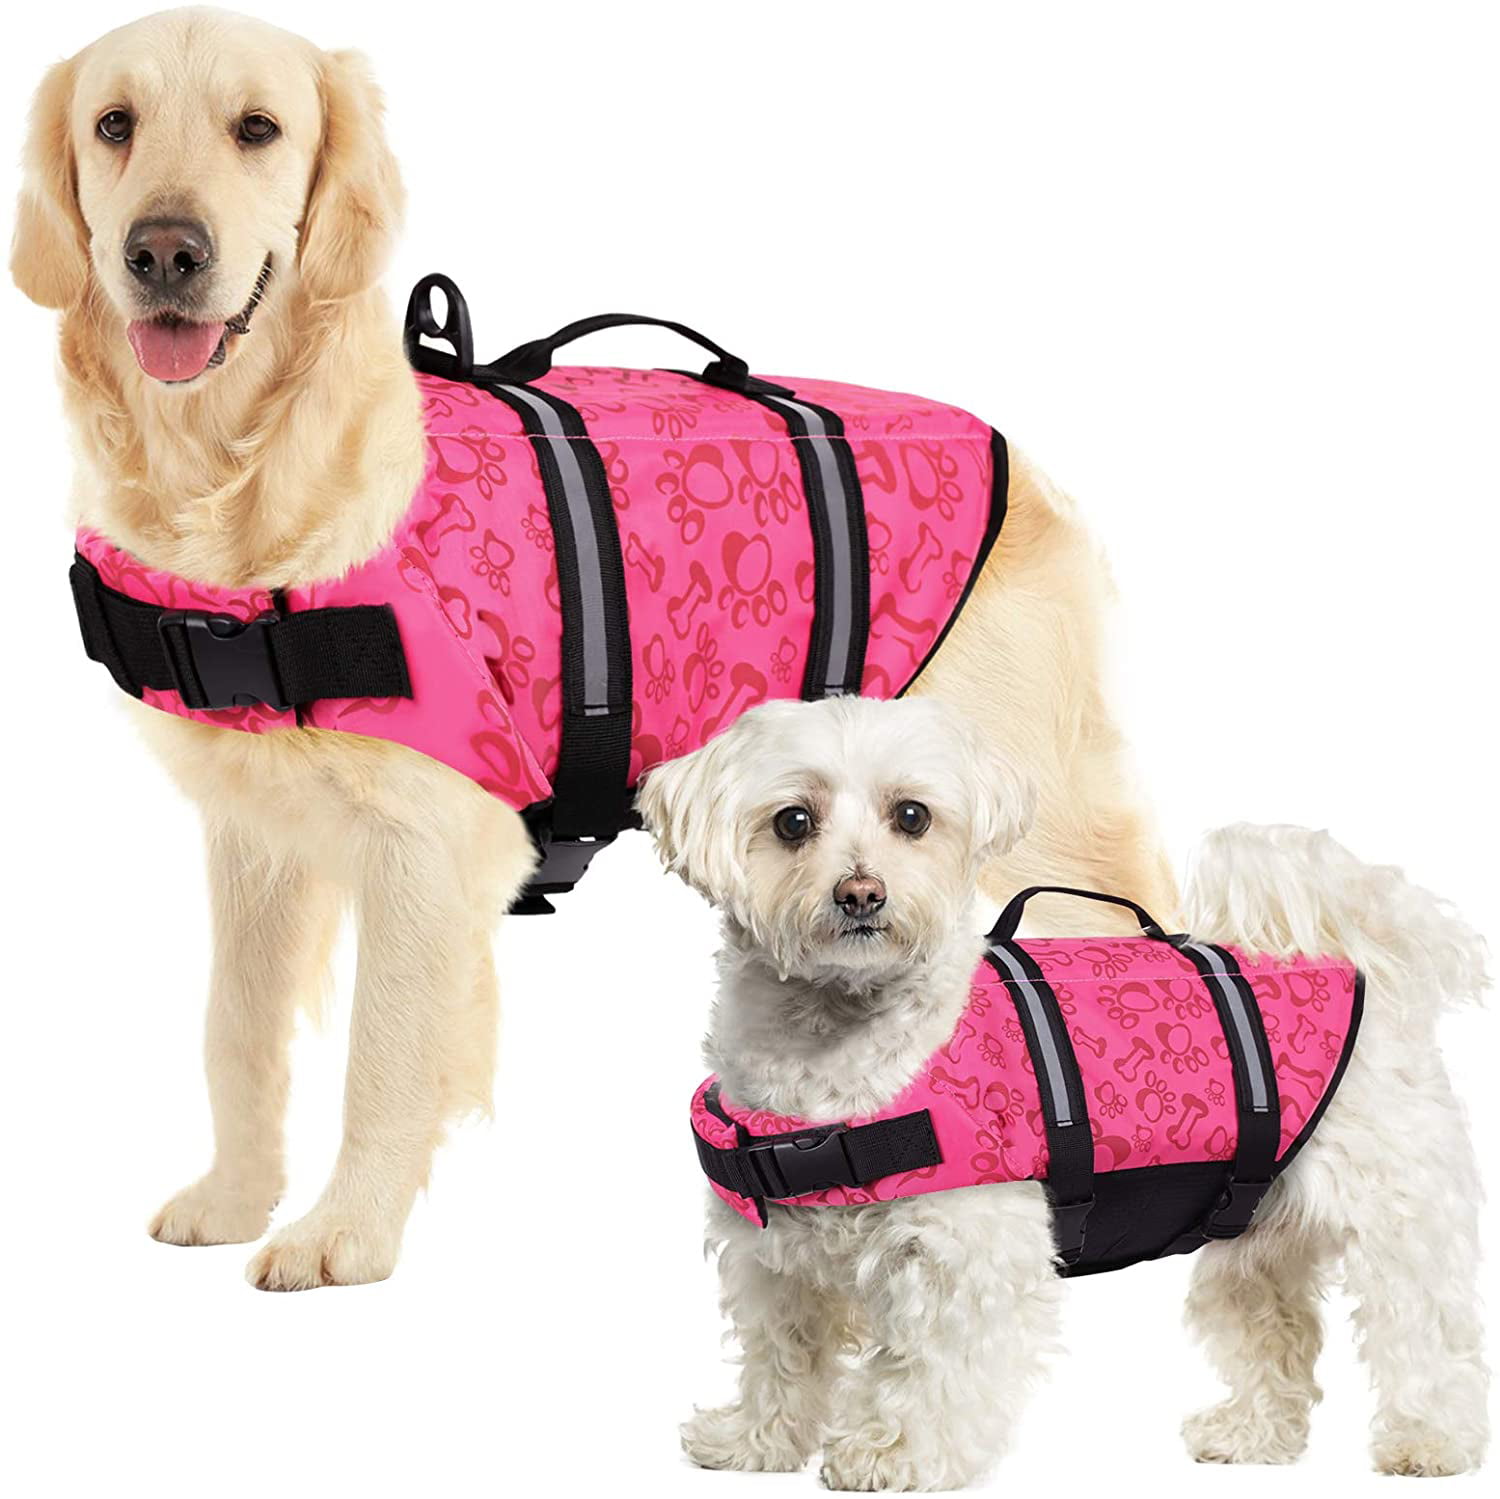 PinkFlower, S Safety Pet Flotation Life Vest with Reflective Stripes and Rescue Handle Adjustable Puppy Lifesaver Swimsuit Preserver for Small Medium Large Dogs SUNFURA Ripstop Dog Life Jacket 